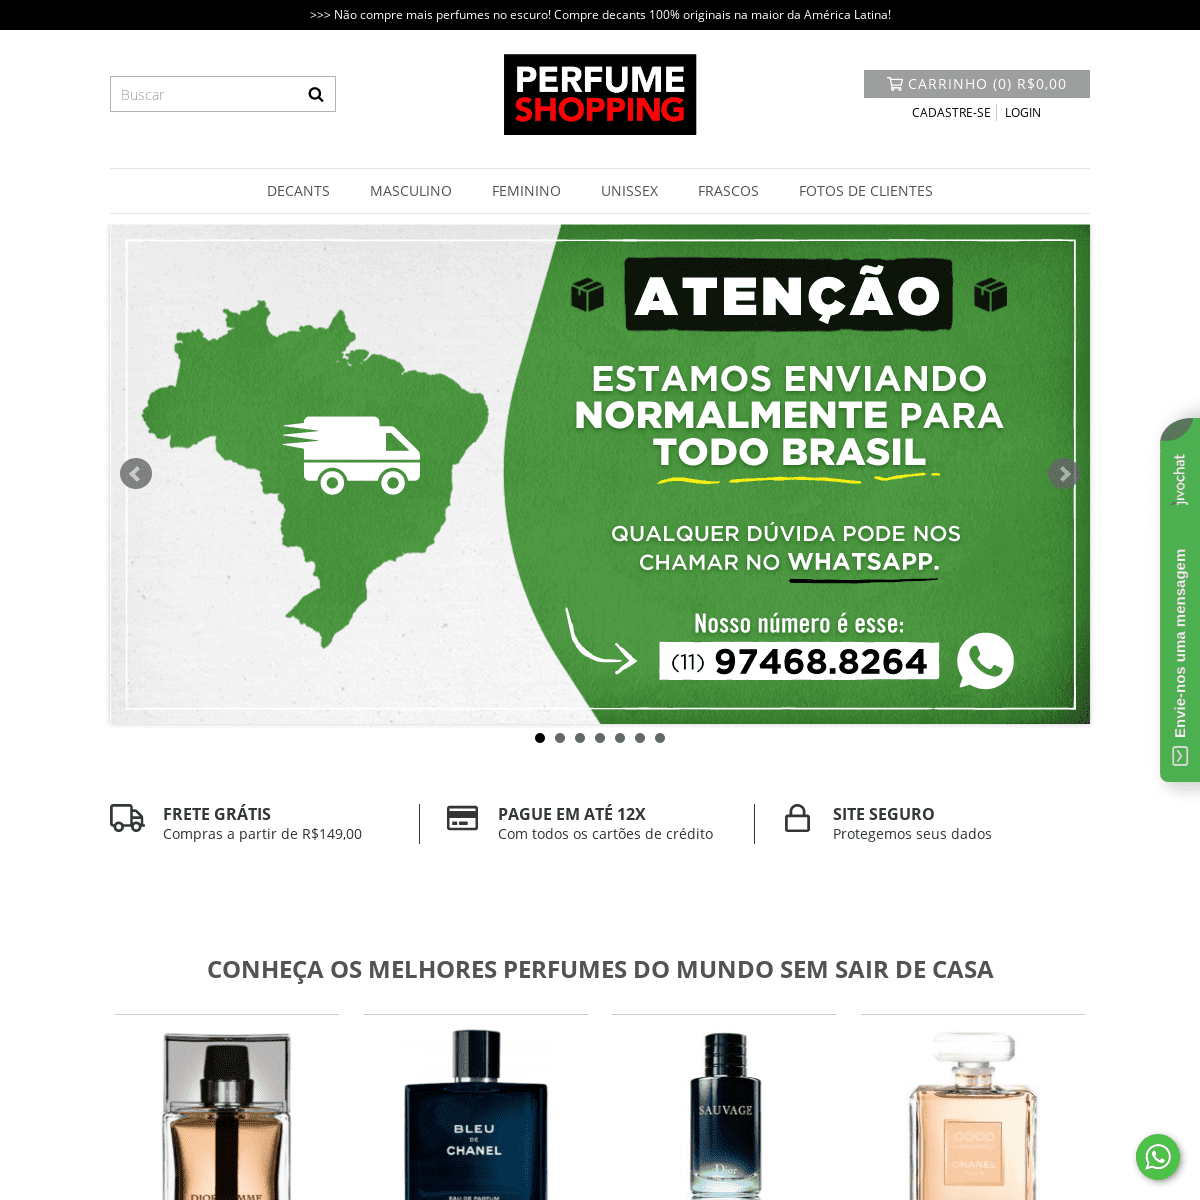 A complete backup of perfumeshopping.com.br